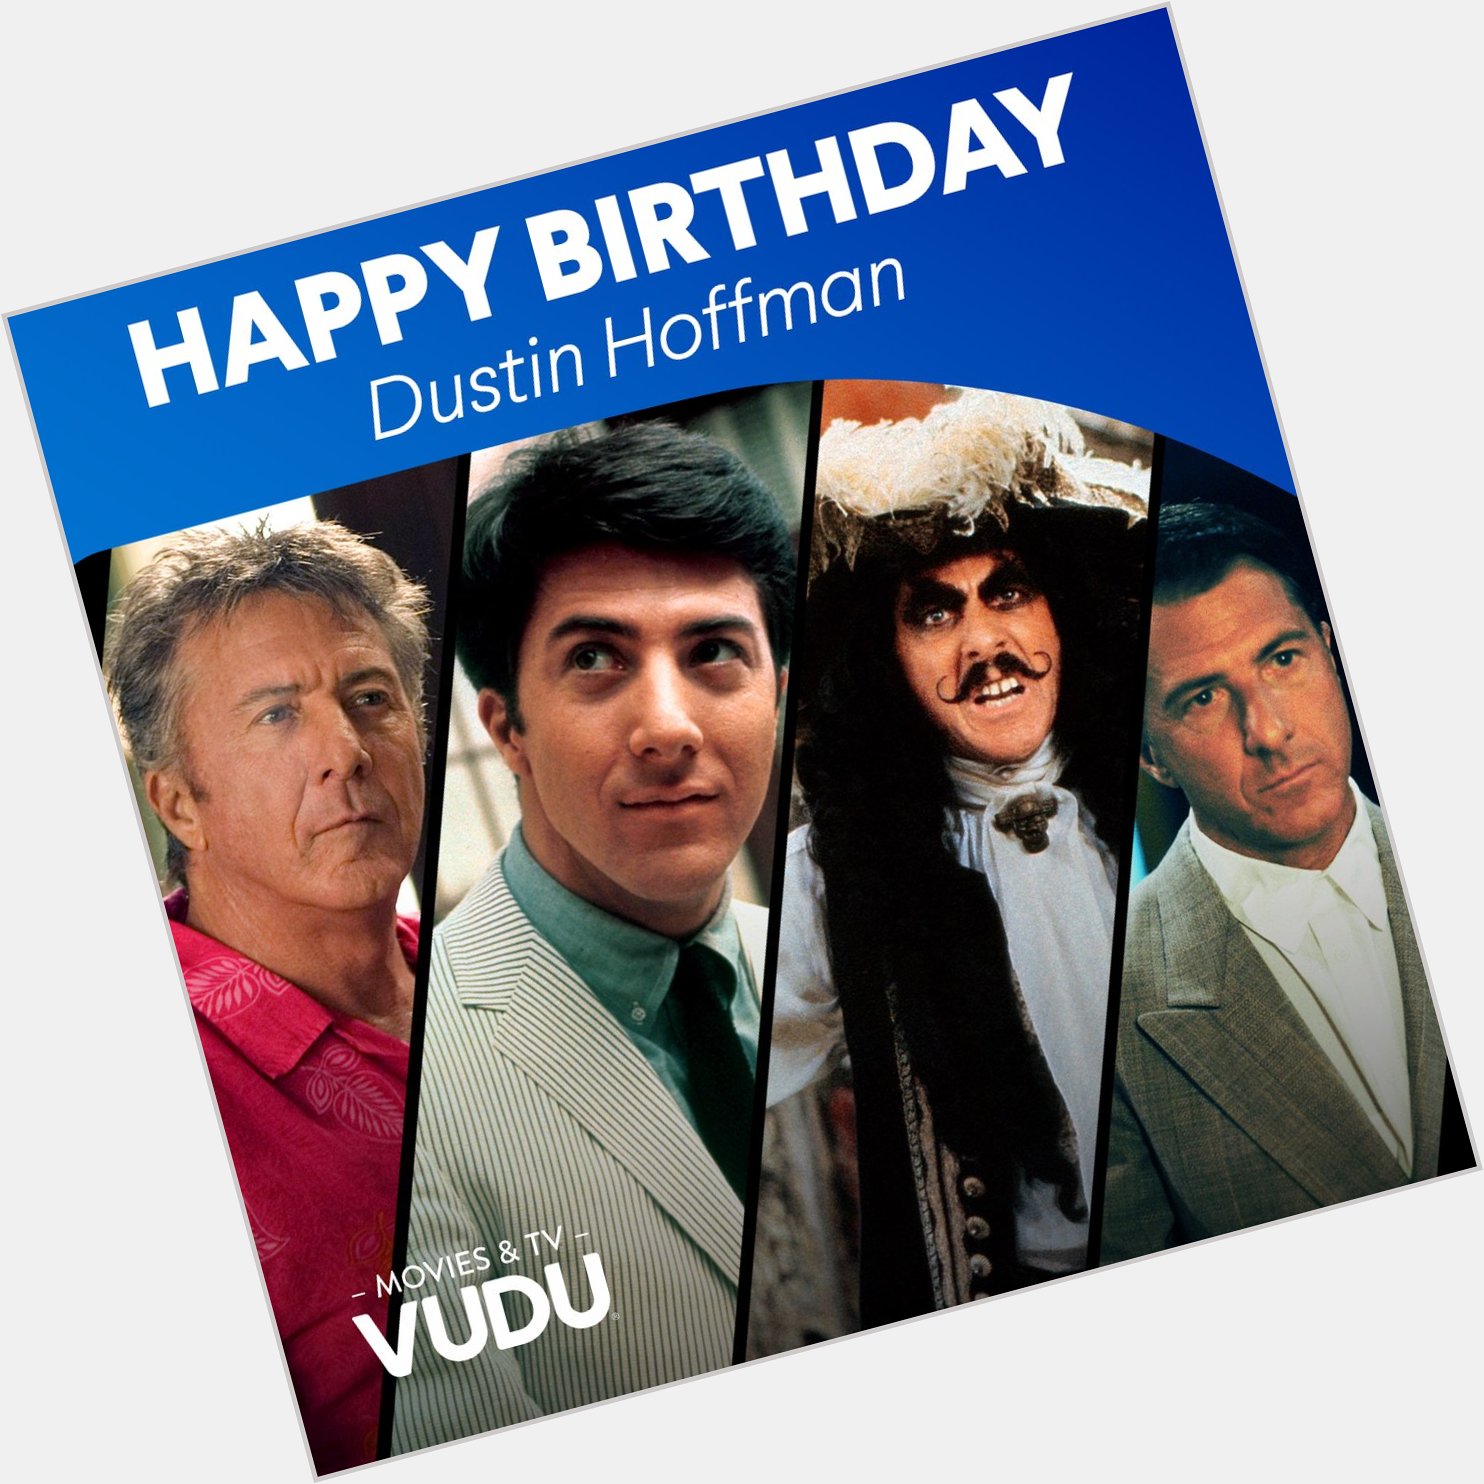 Happy Birthday Dustin Hoffman! Out of his 83 acting credits which one is your all time favorite? 